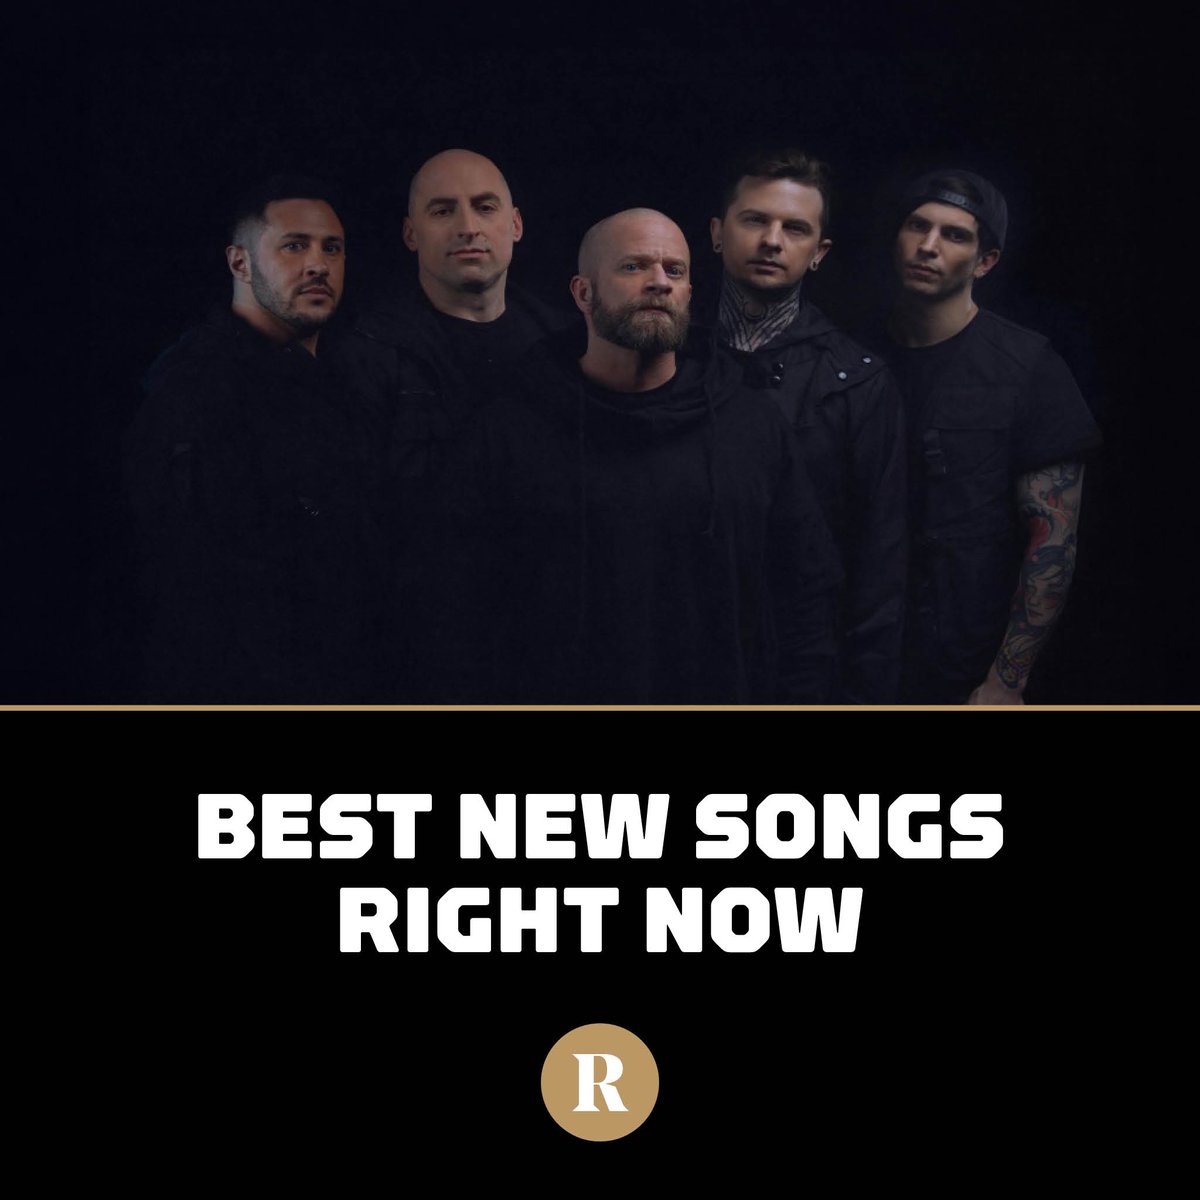 > @ATRhq featured on @Revolvermag '6 Best New Songs Right Now' revolvermag.com/music/6-best-n…